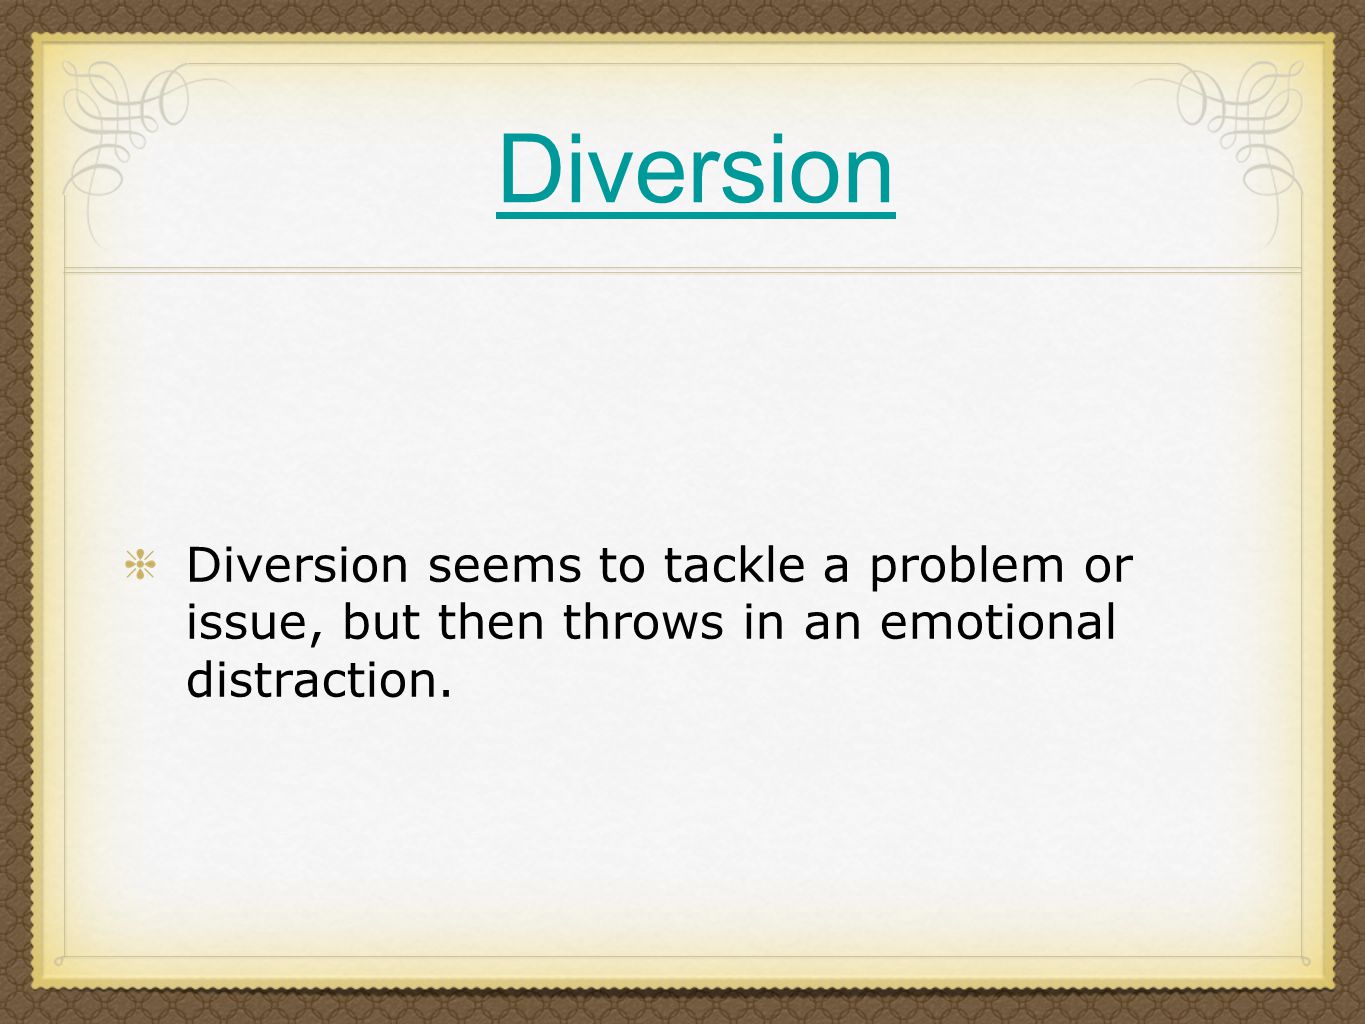 Diversion Diversion seems to tackle a problem or issue, but then throws in an emotional distraction.